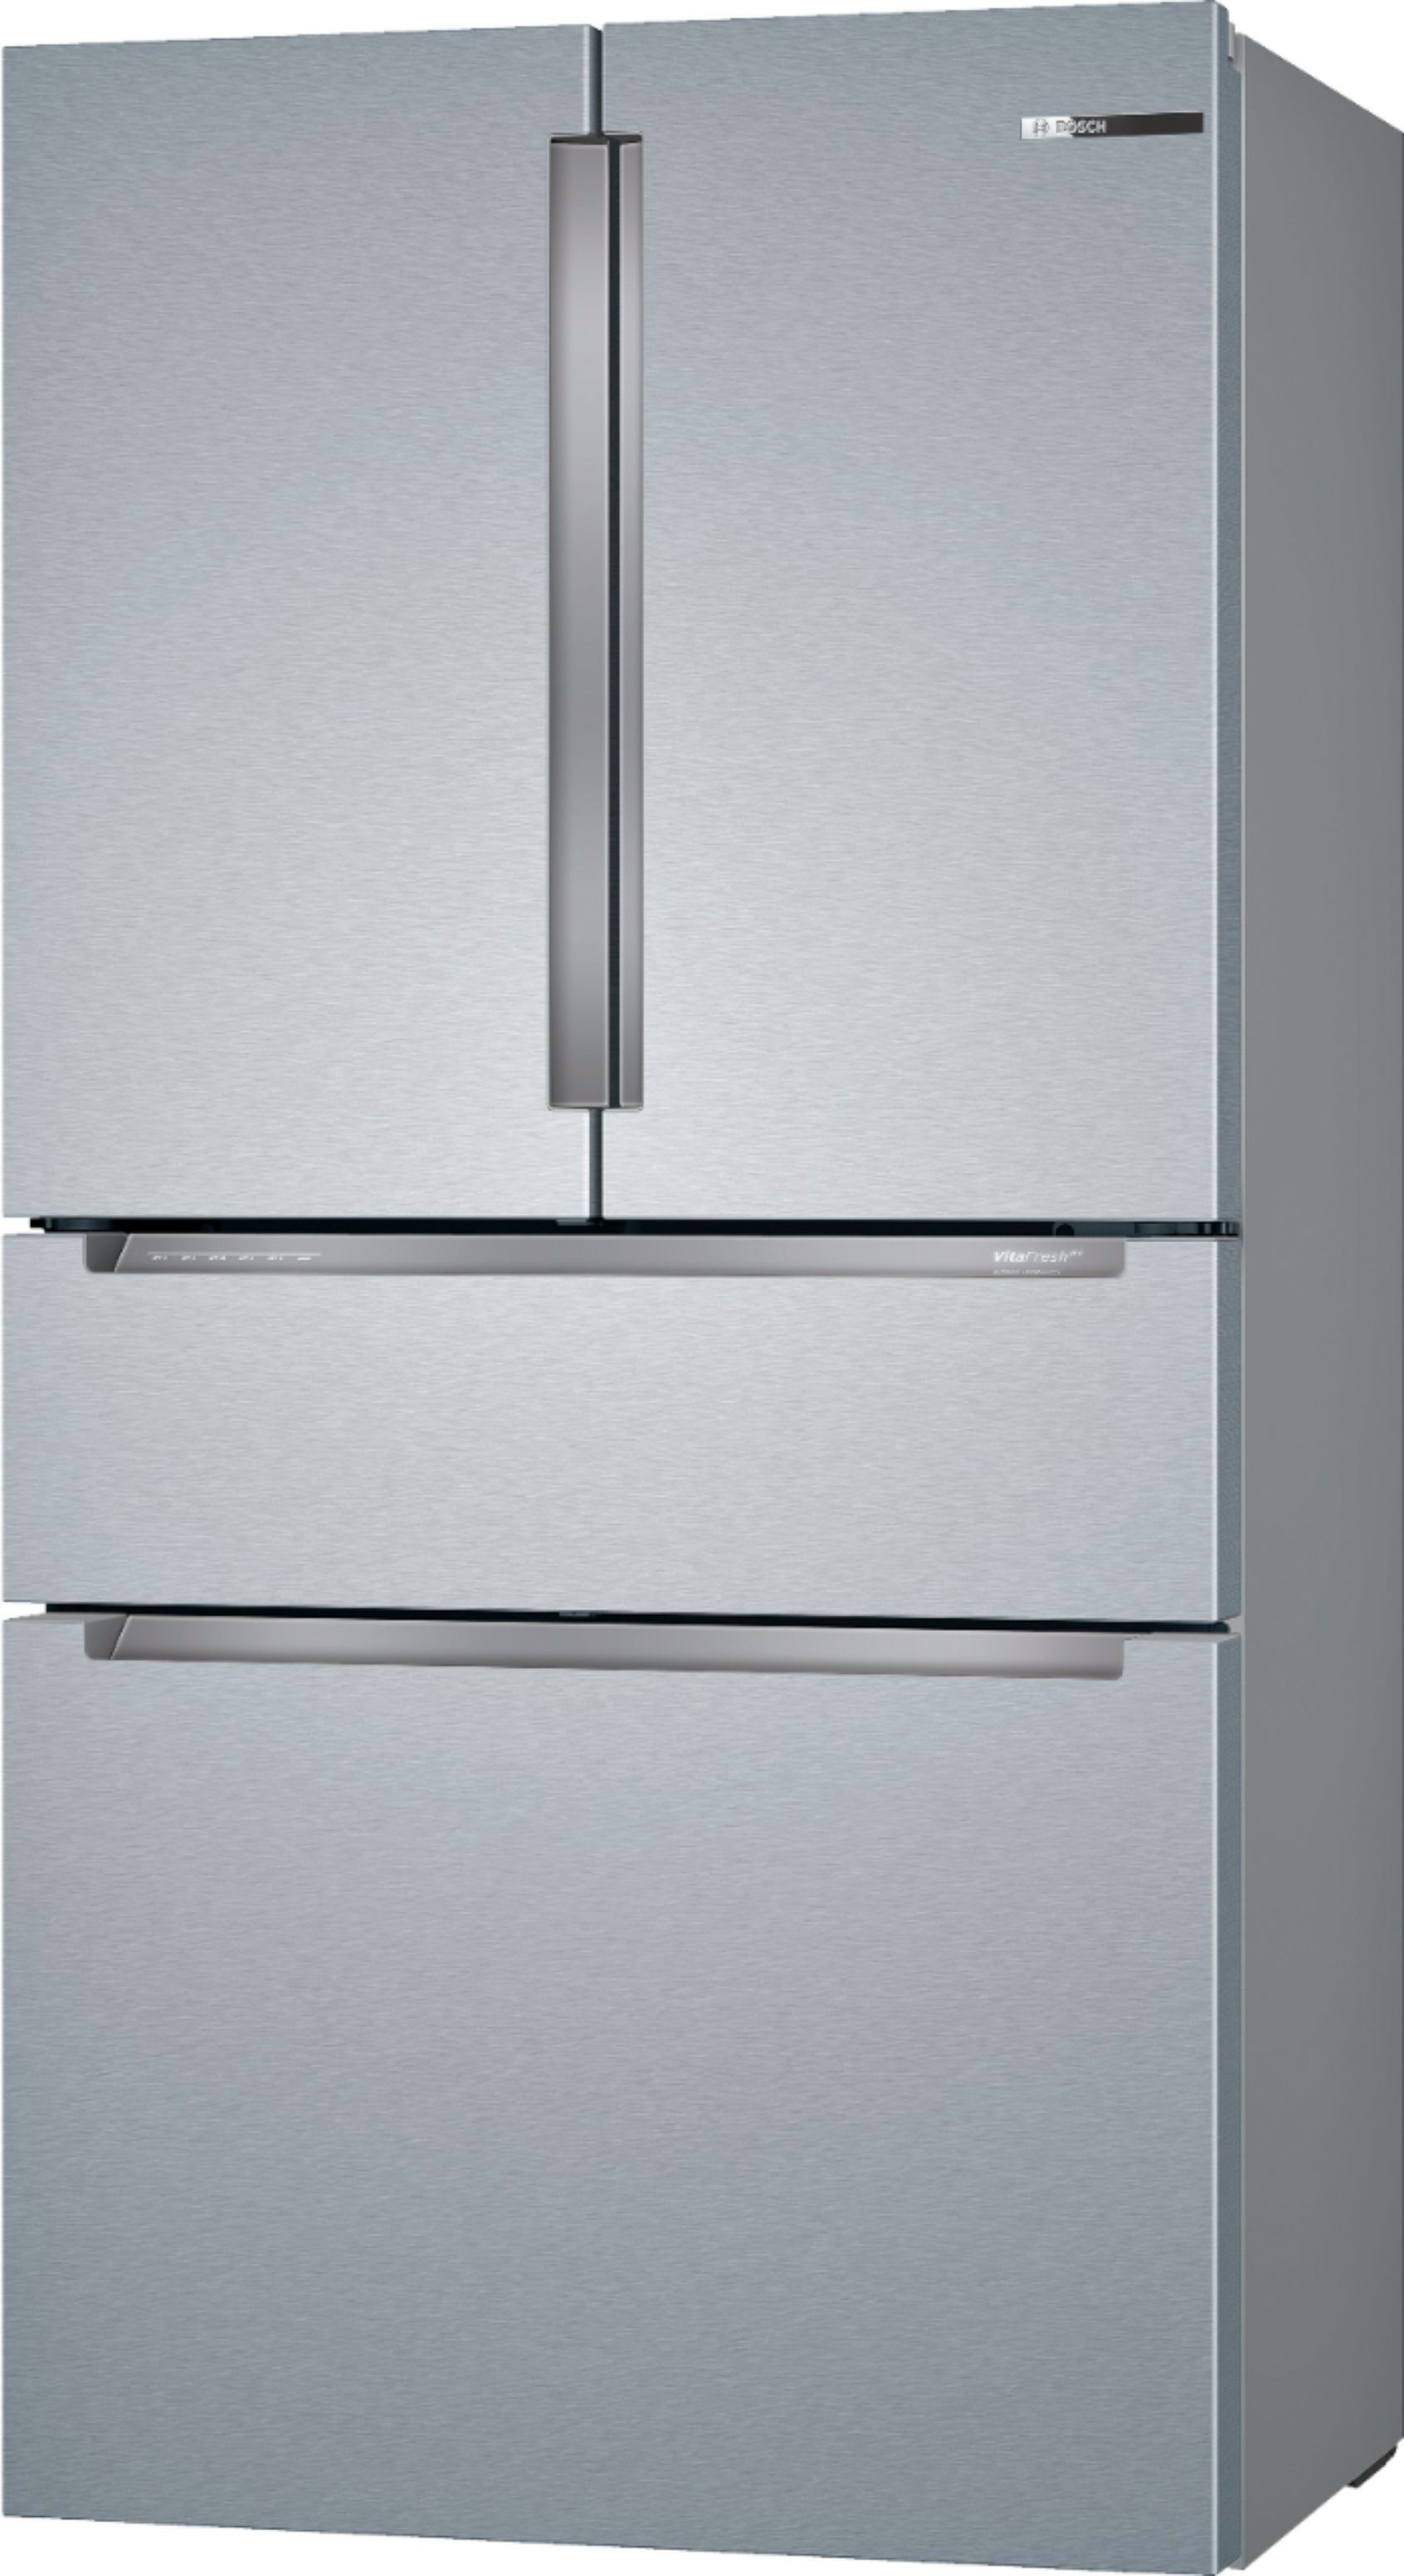 B36CL80SNS by Bosch - 800 Series French Door Bottom Mount